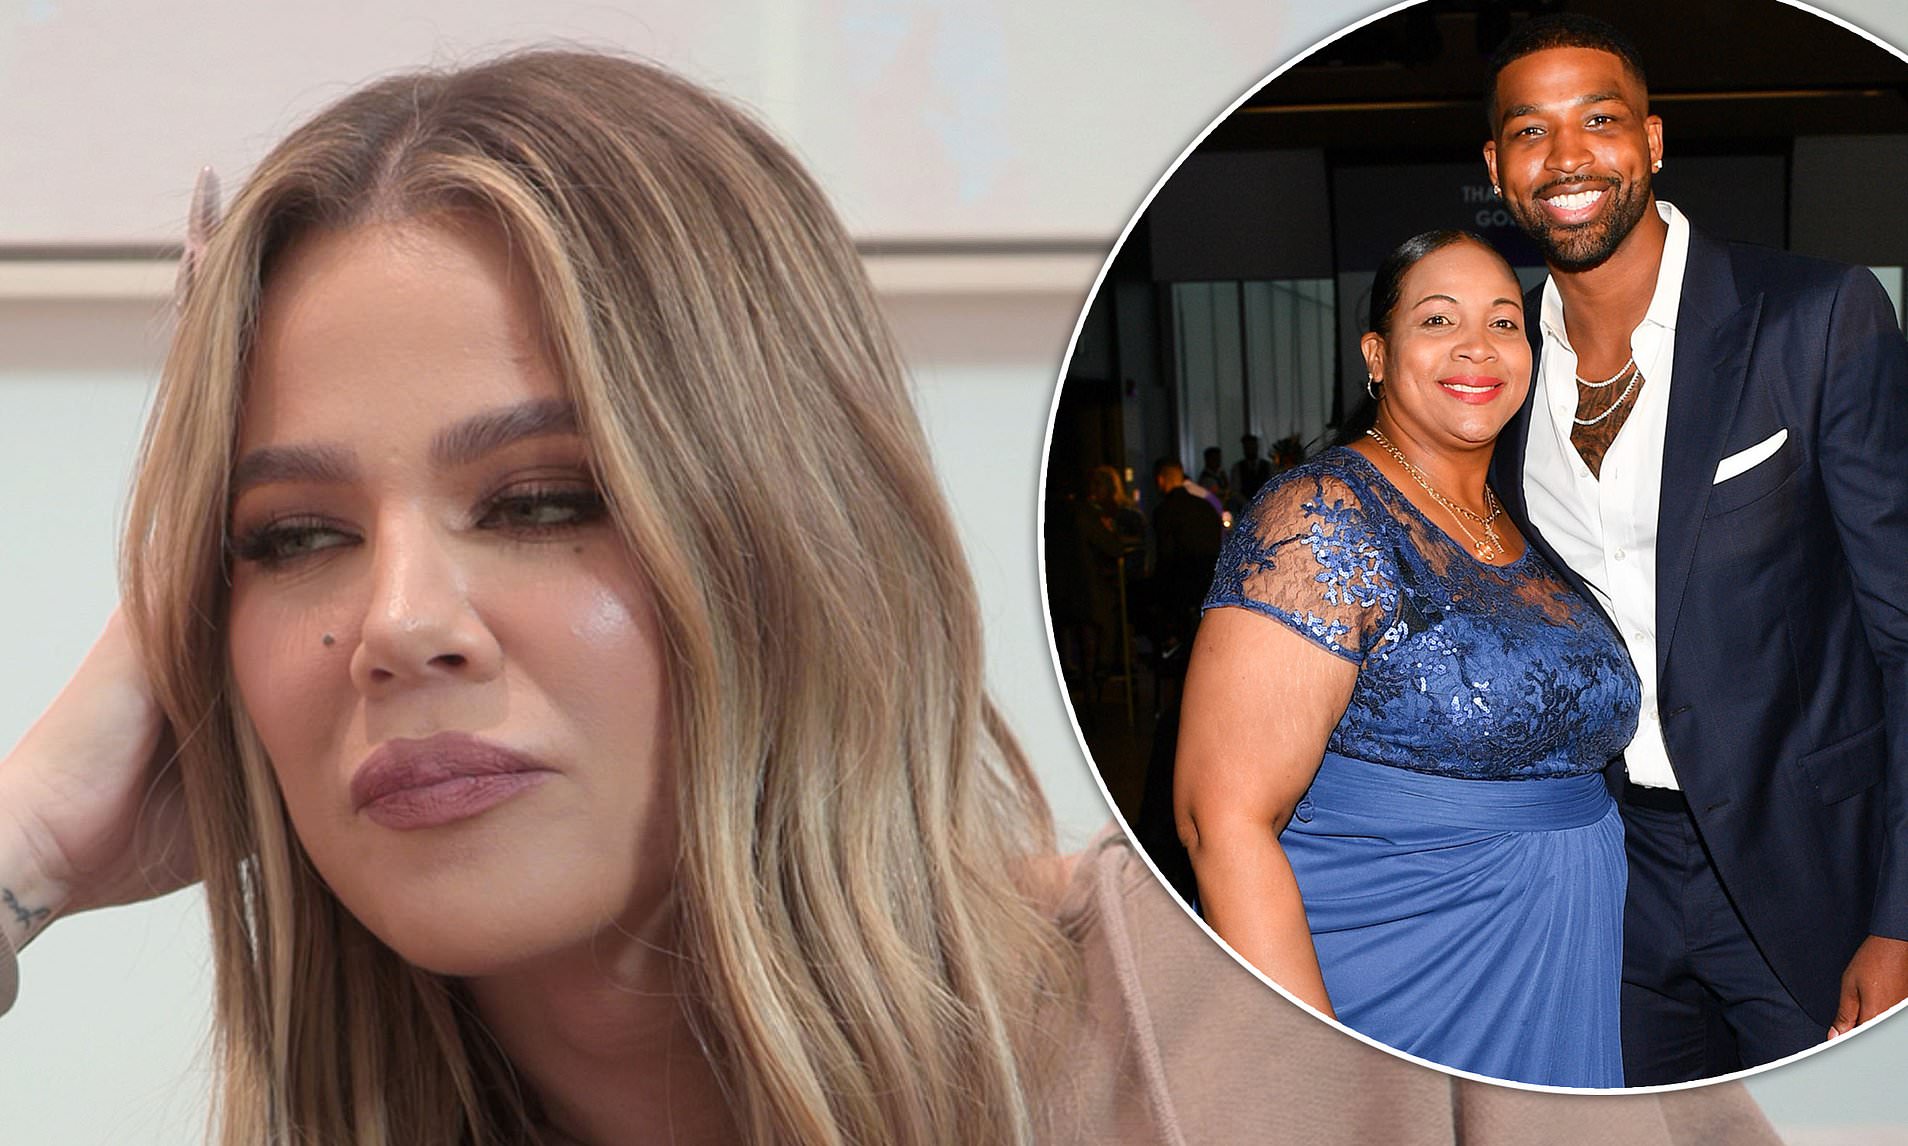 Khloe Kardashian will accompany Tristan Thompson to his mother's funeral